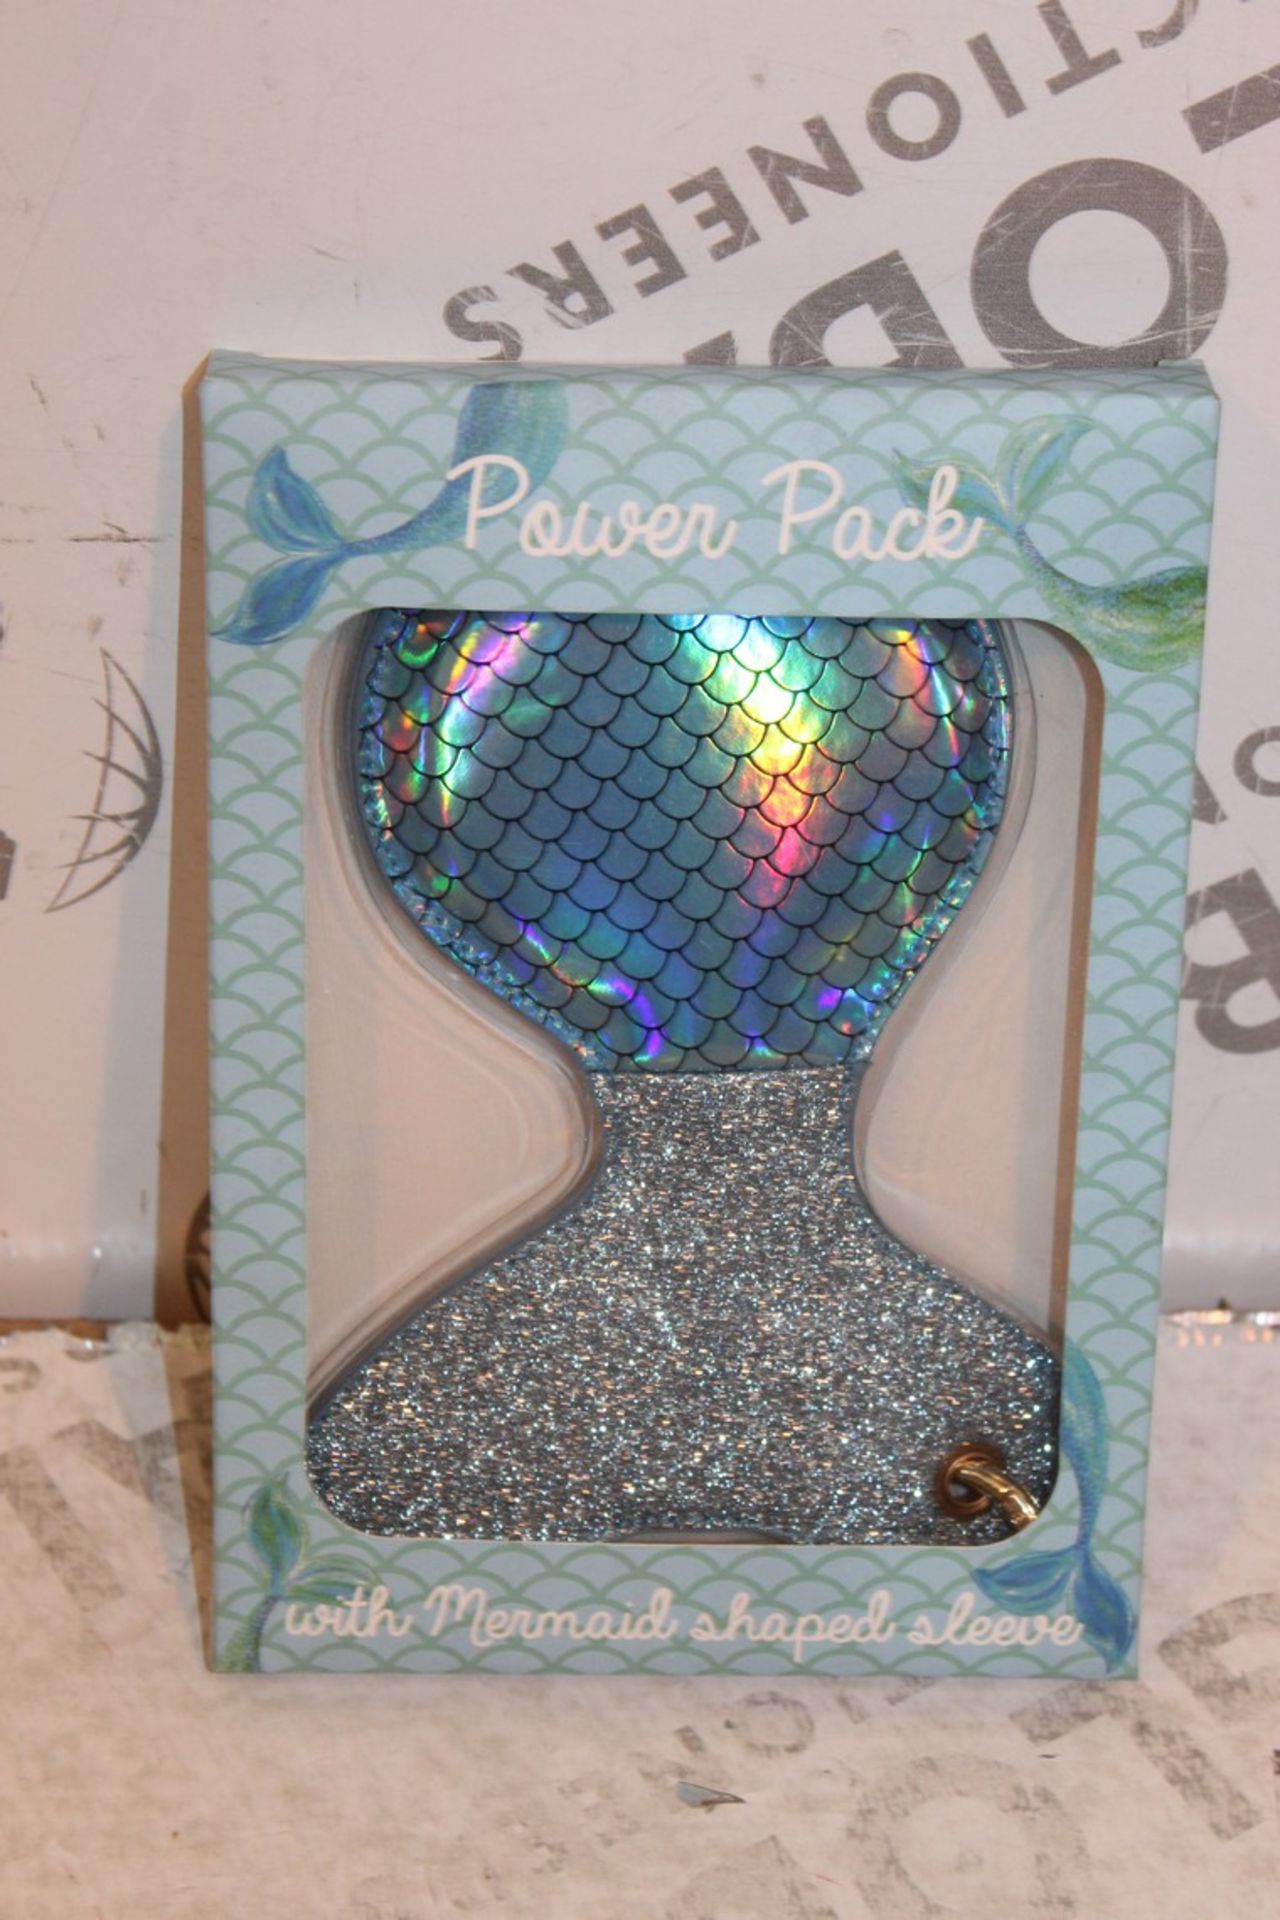 Lot to Contain 20 Brand New Mermaid Shake Iridescent Power Pack Chargers RRP £300 Combined (